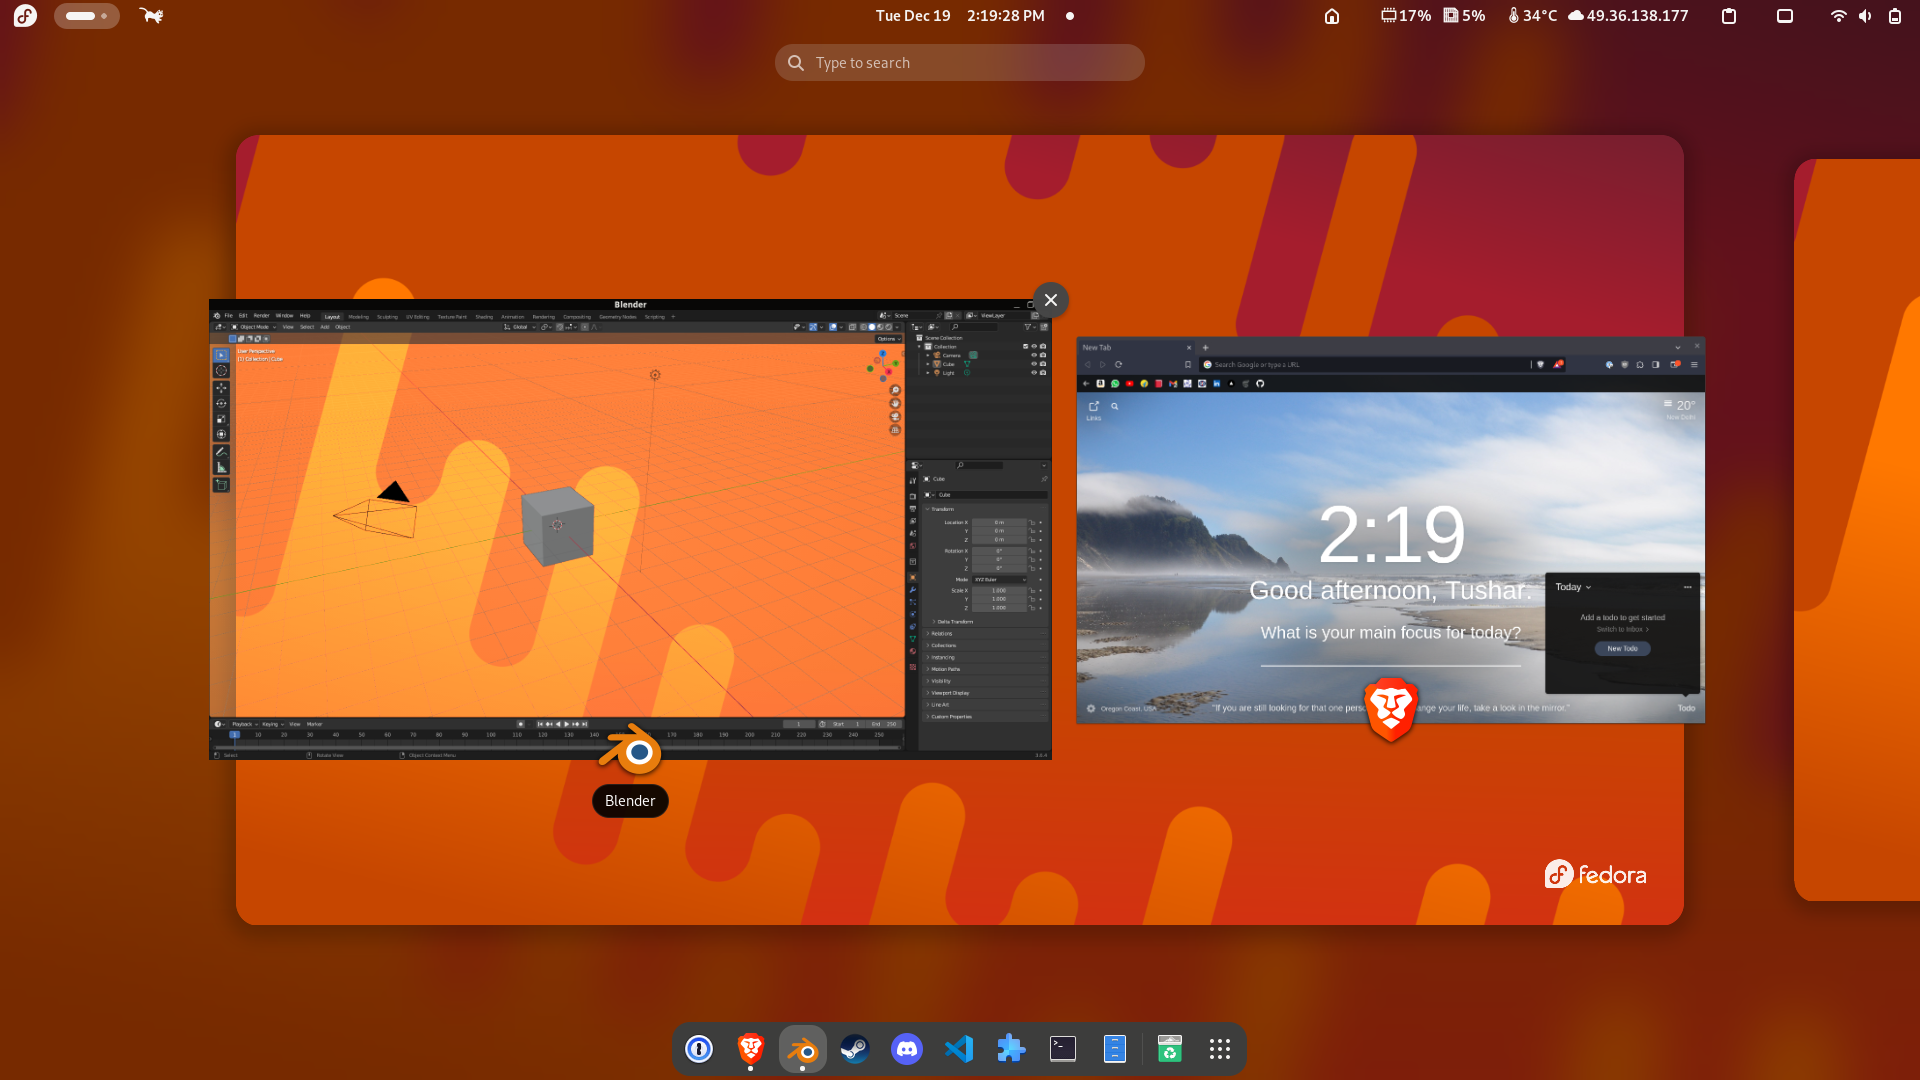 Overview of my Gnome Desktop